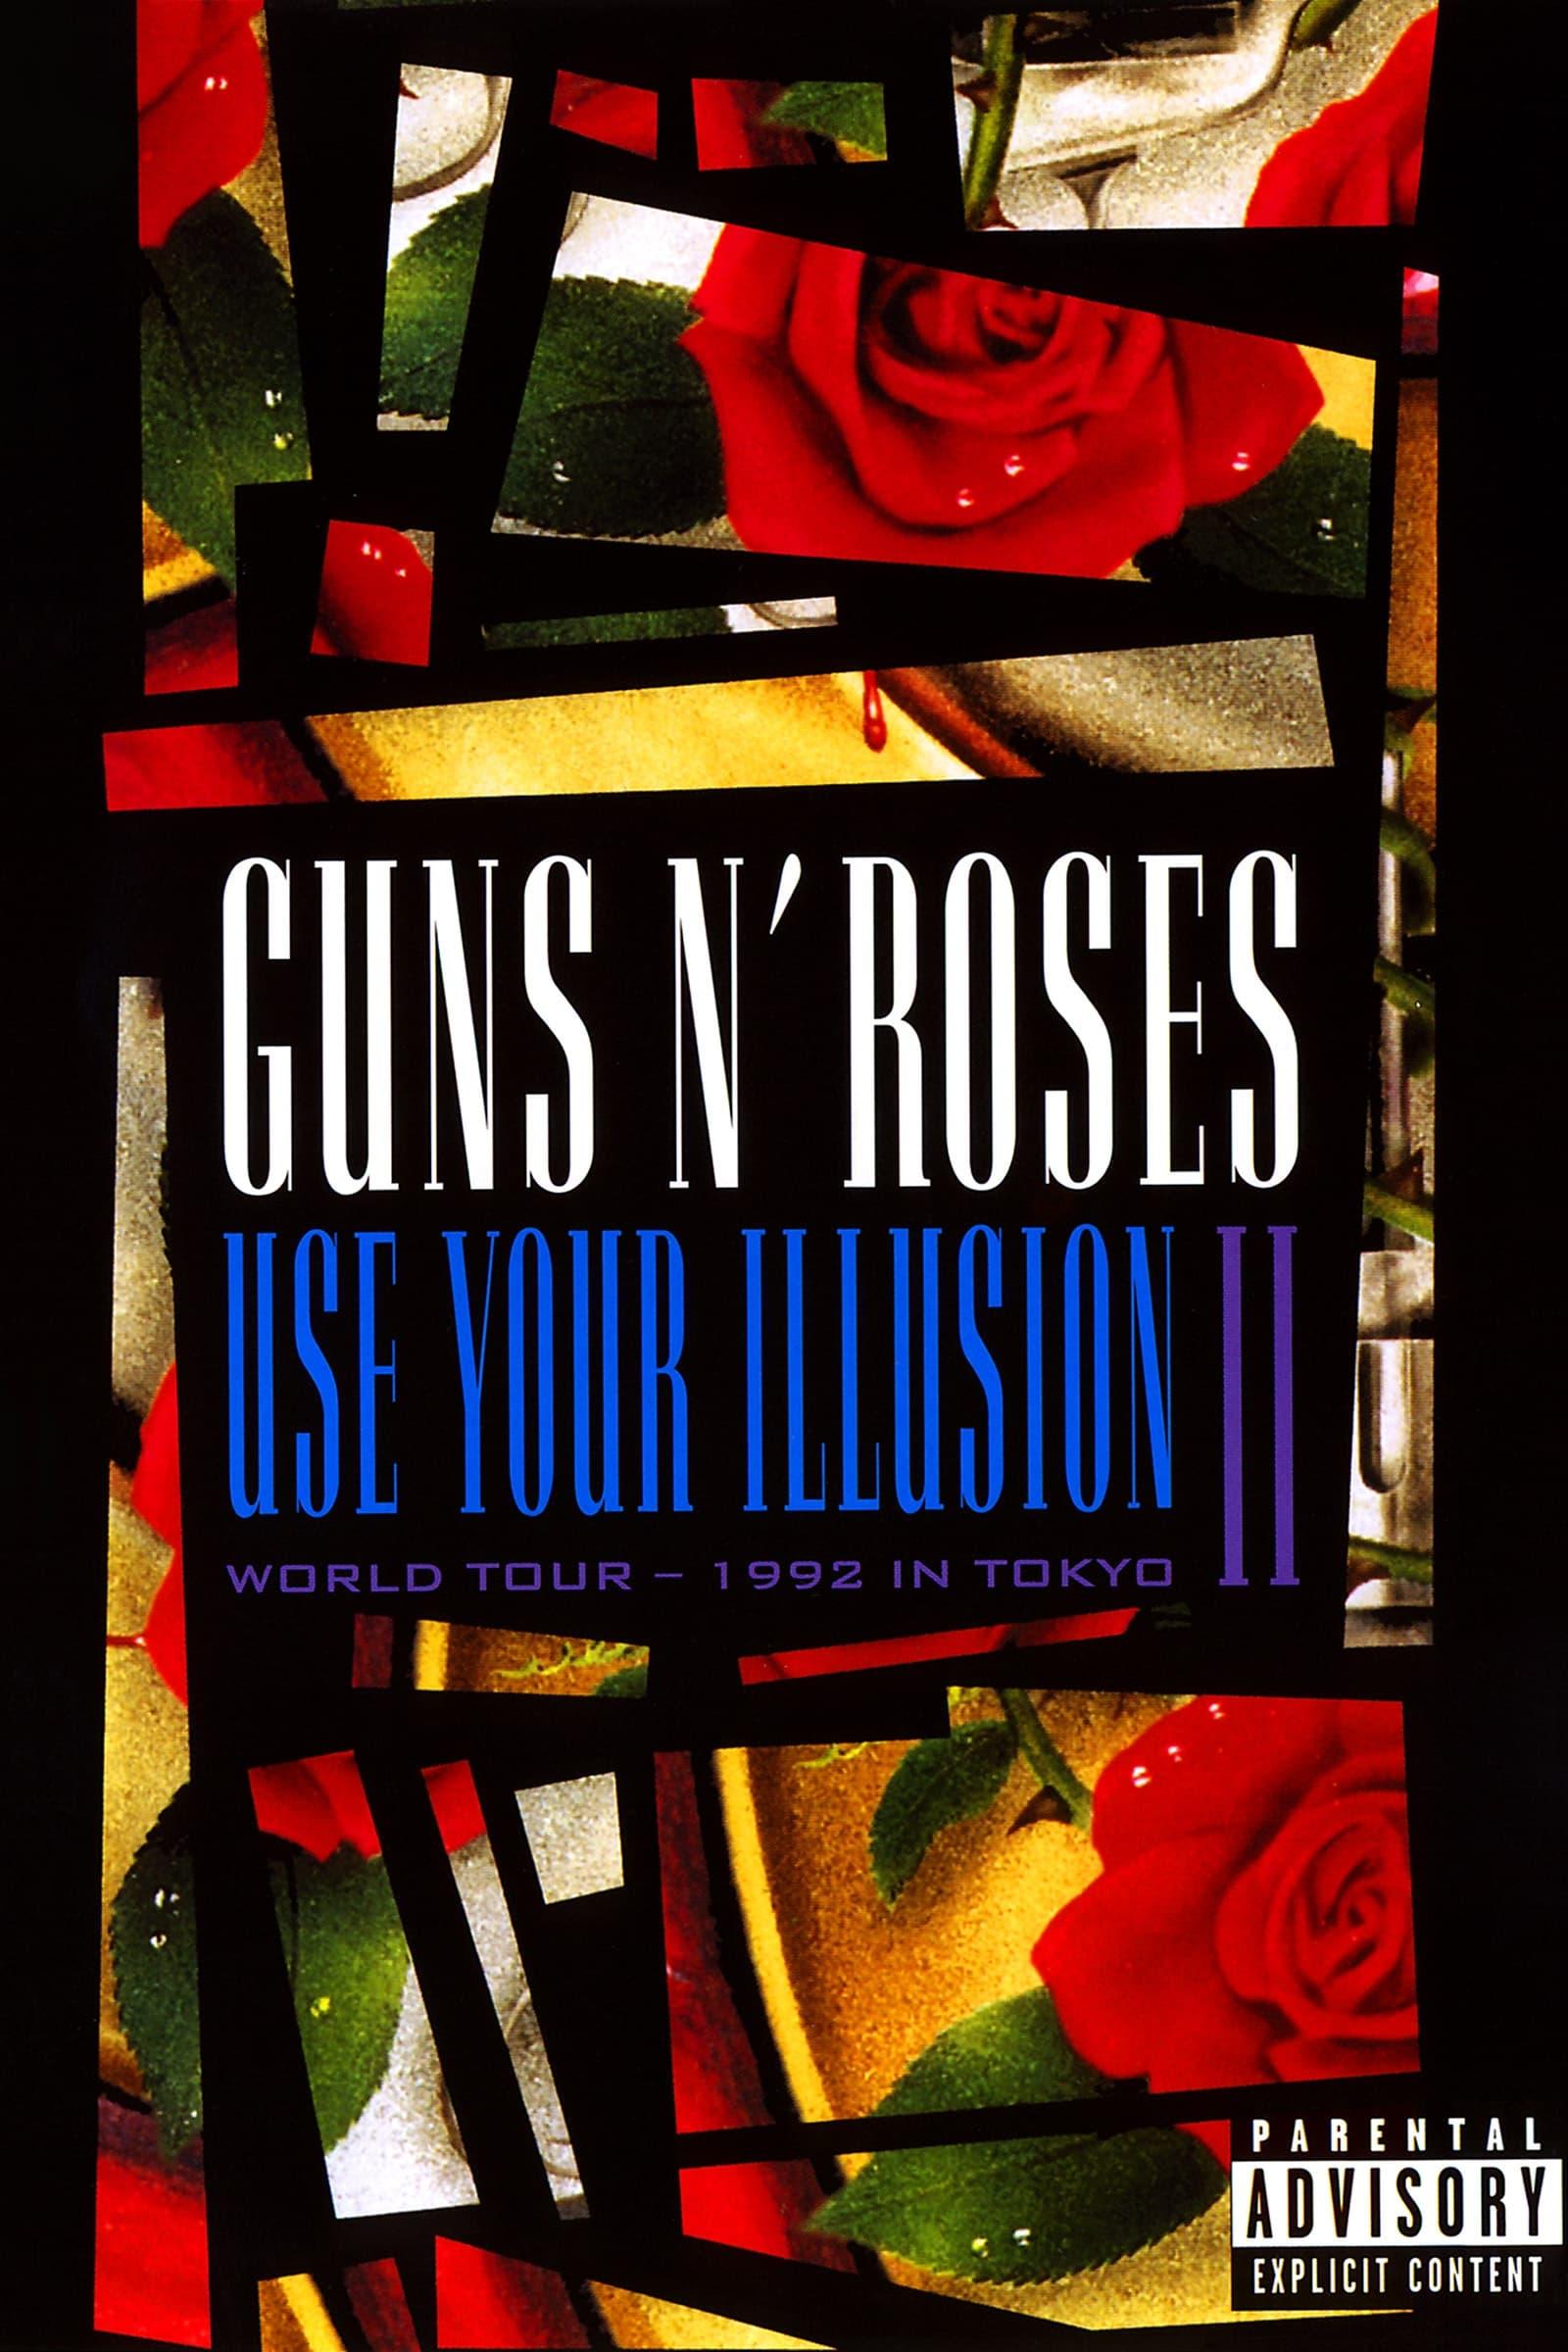 Guns N' Roses: Use Your Illusion II poster